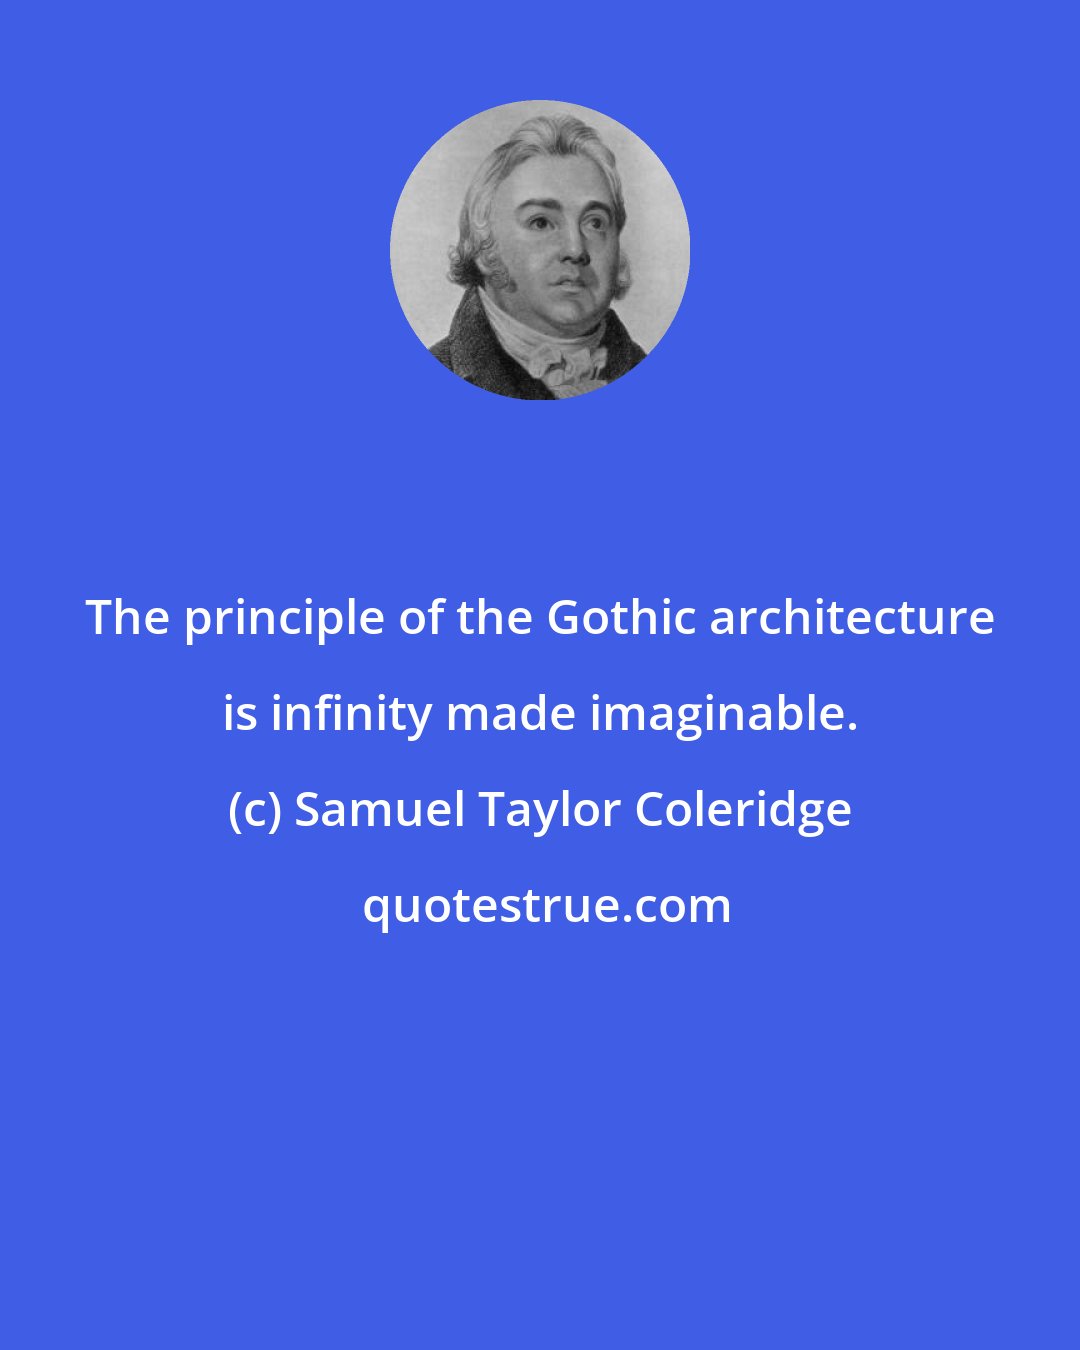 Samuel Taylor Coleridge: The principle of the Gothic architecture is infinity made imaginable.